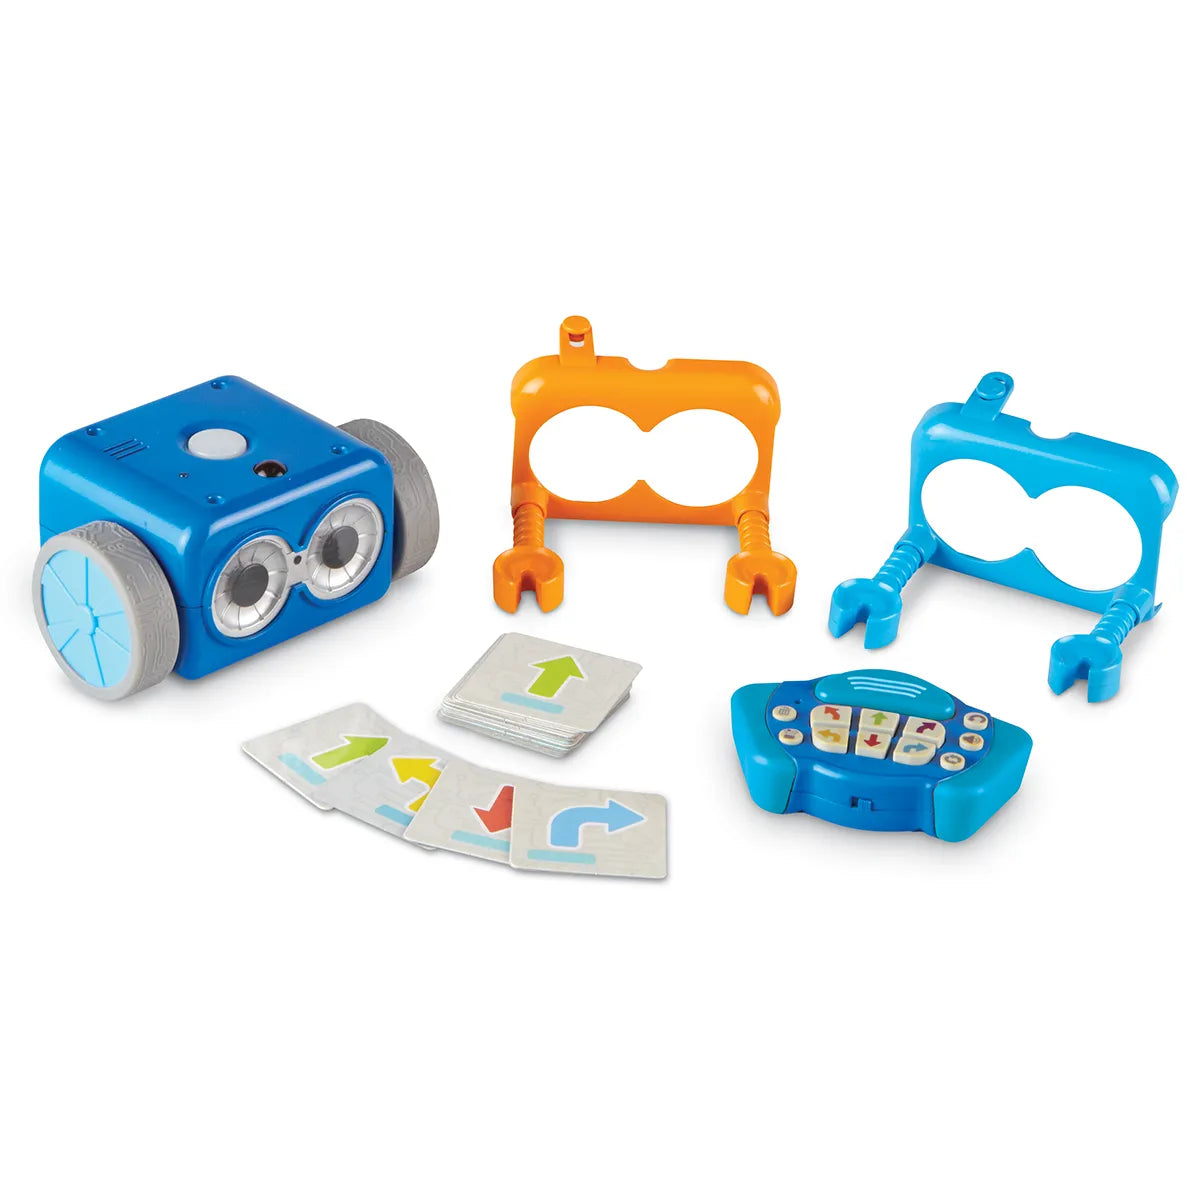 How STEM toys can help your child to learn Coding